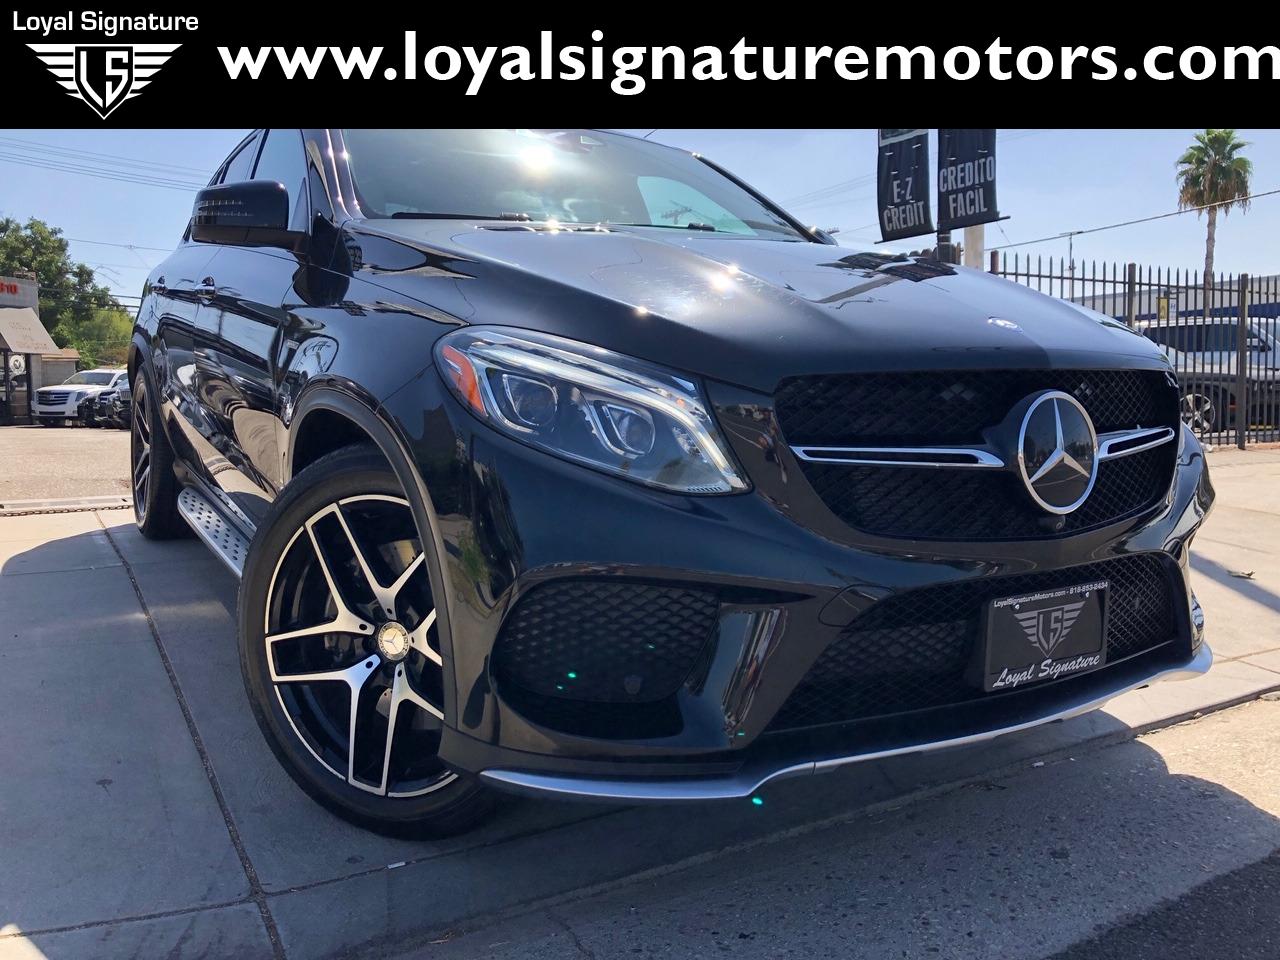 Used 2016 Mercedes Benz Gle Gle 450 Amg For Sale 44995